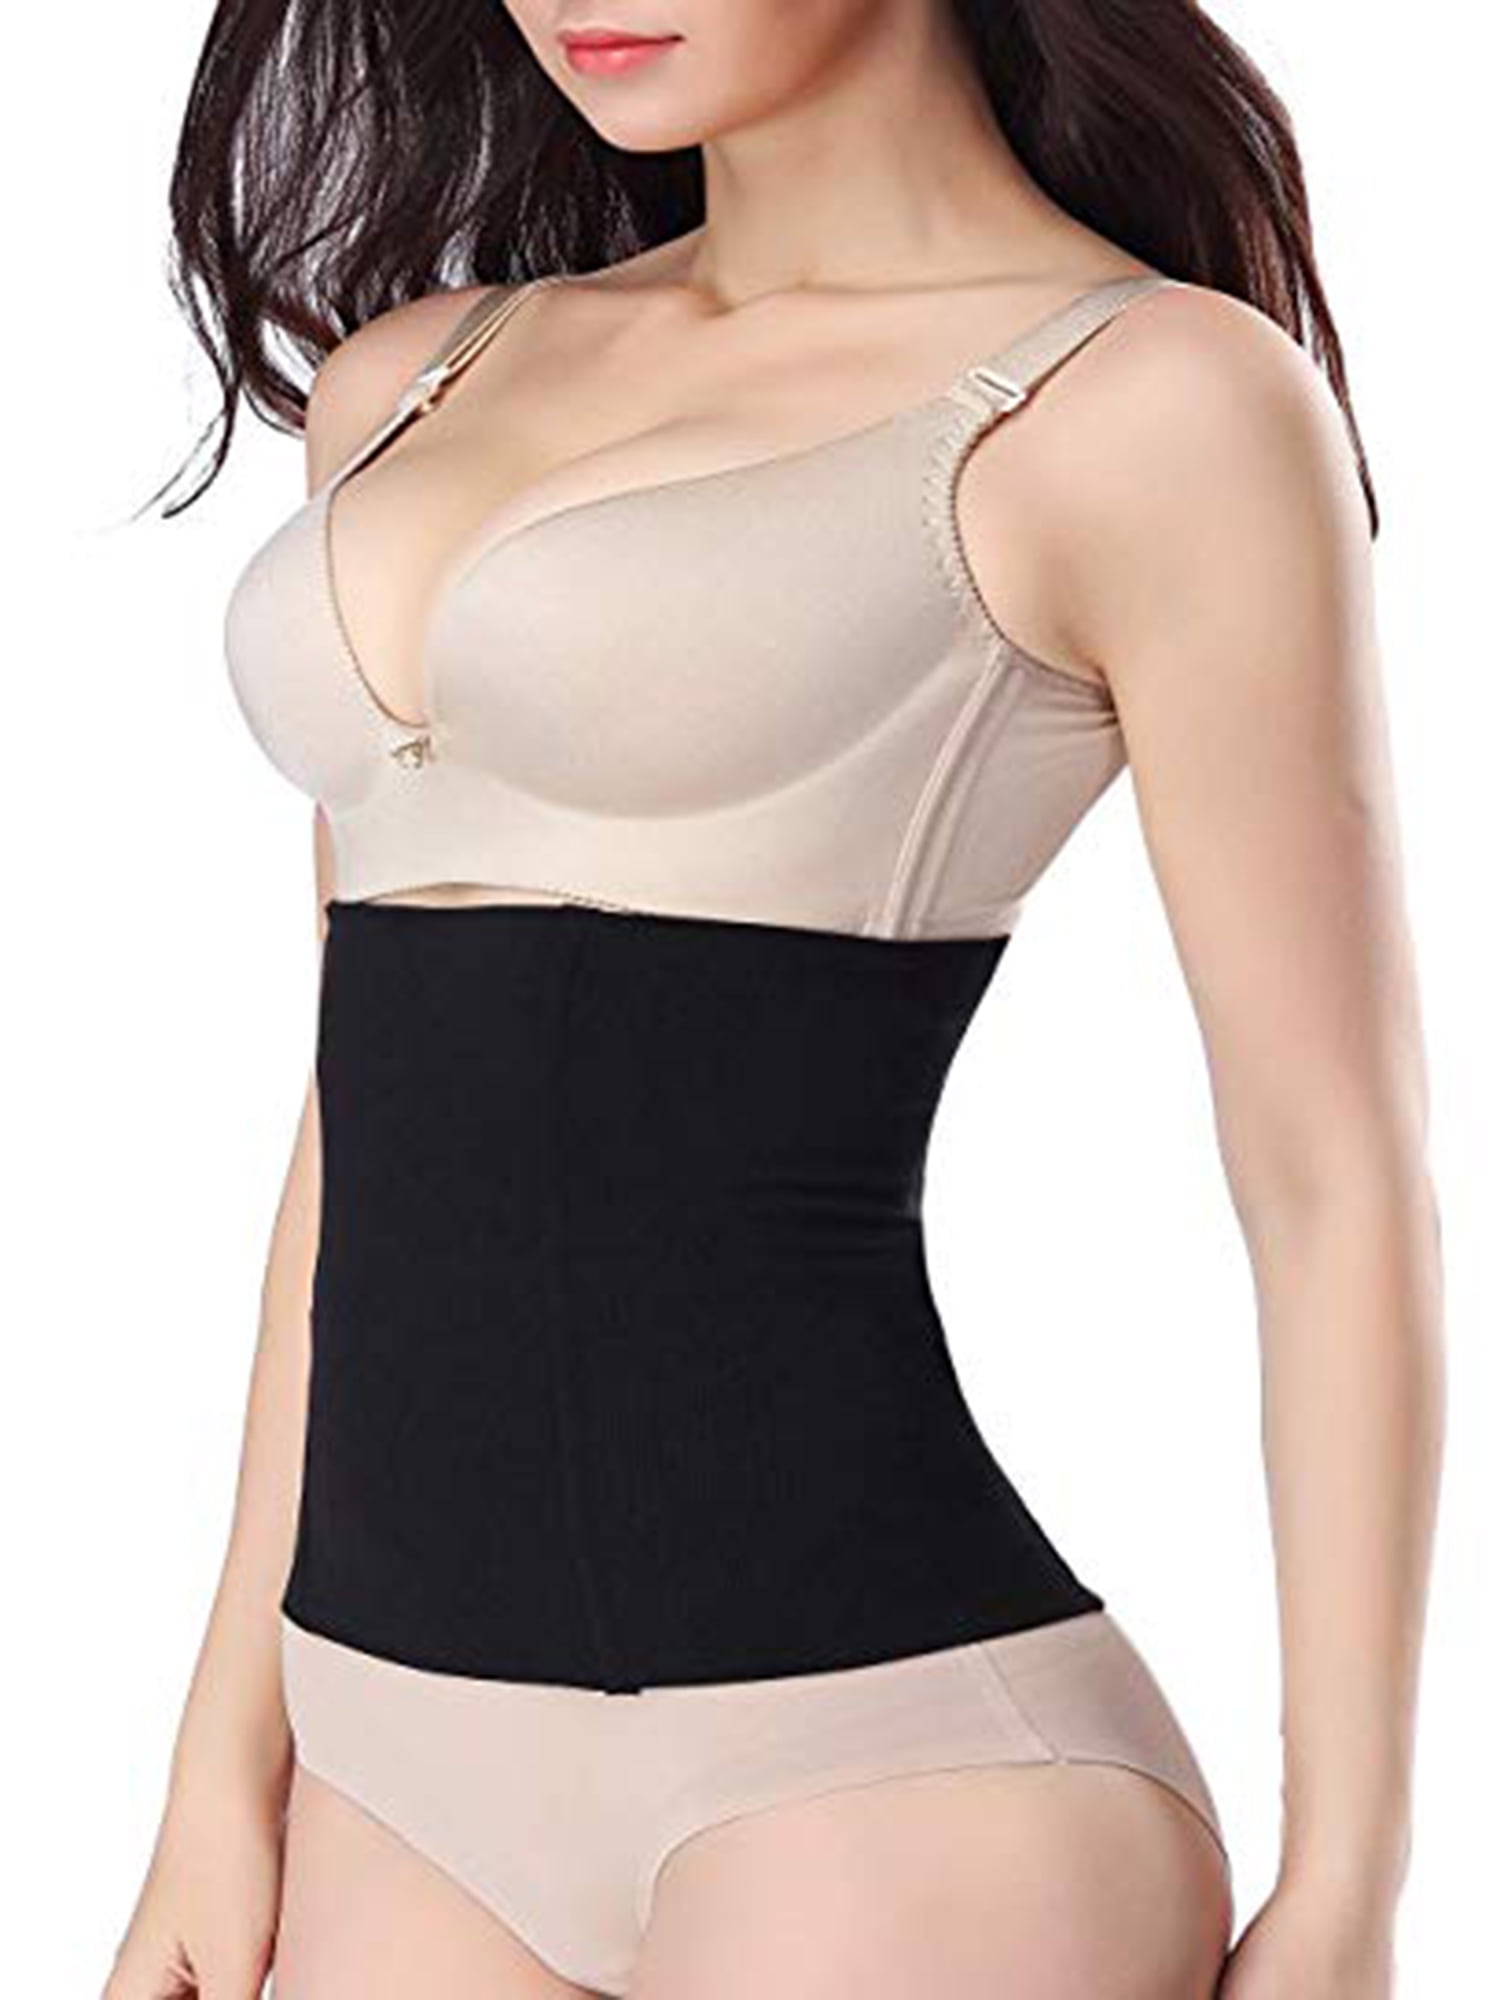 Women Postpartum Girdle Corset Recovery Belly Band Wrap Belt for an Hourglass Shaper 